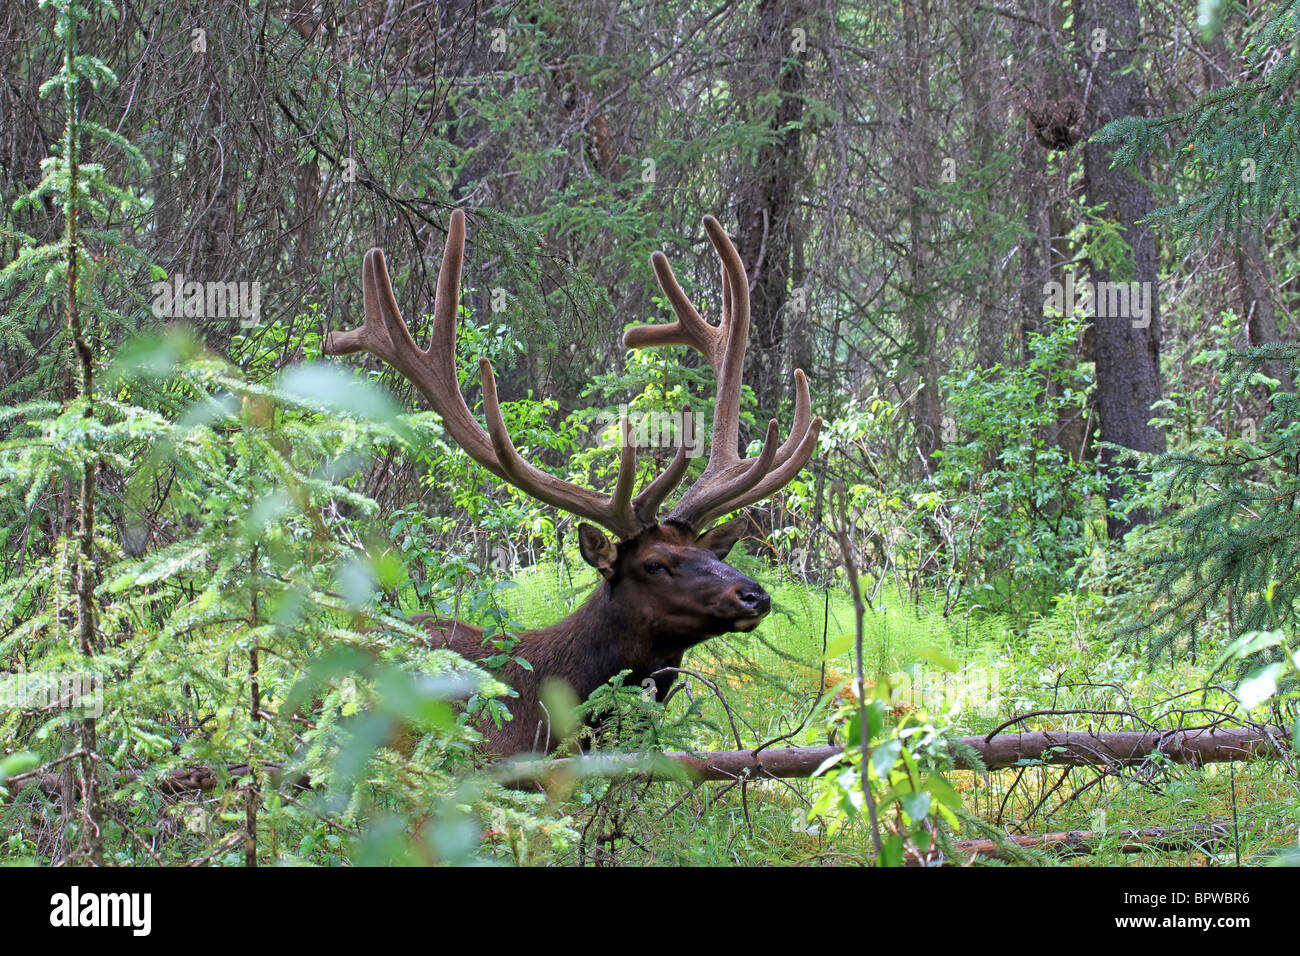 Wildlife royal Elk in a thick forest in Alberta, Canada. Antlers covered in velvet during summer. Stock Photo